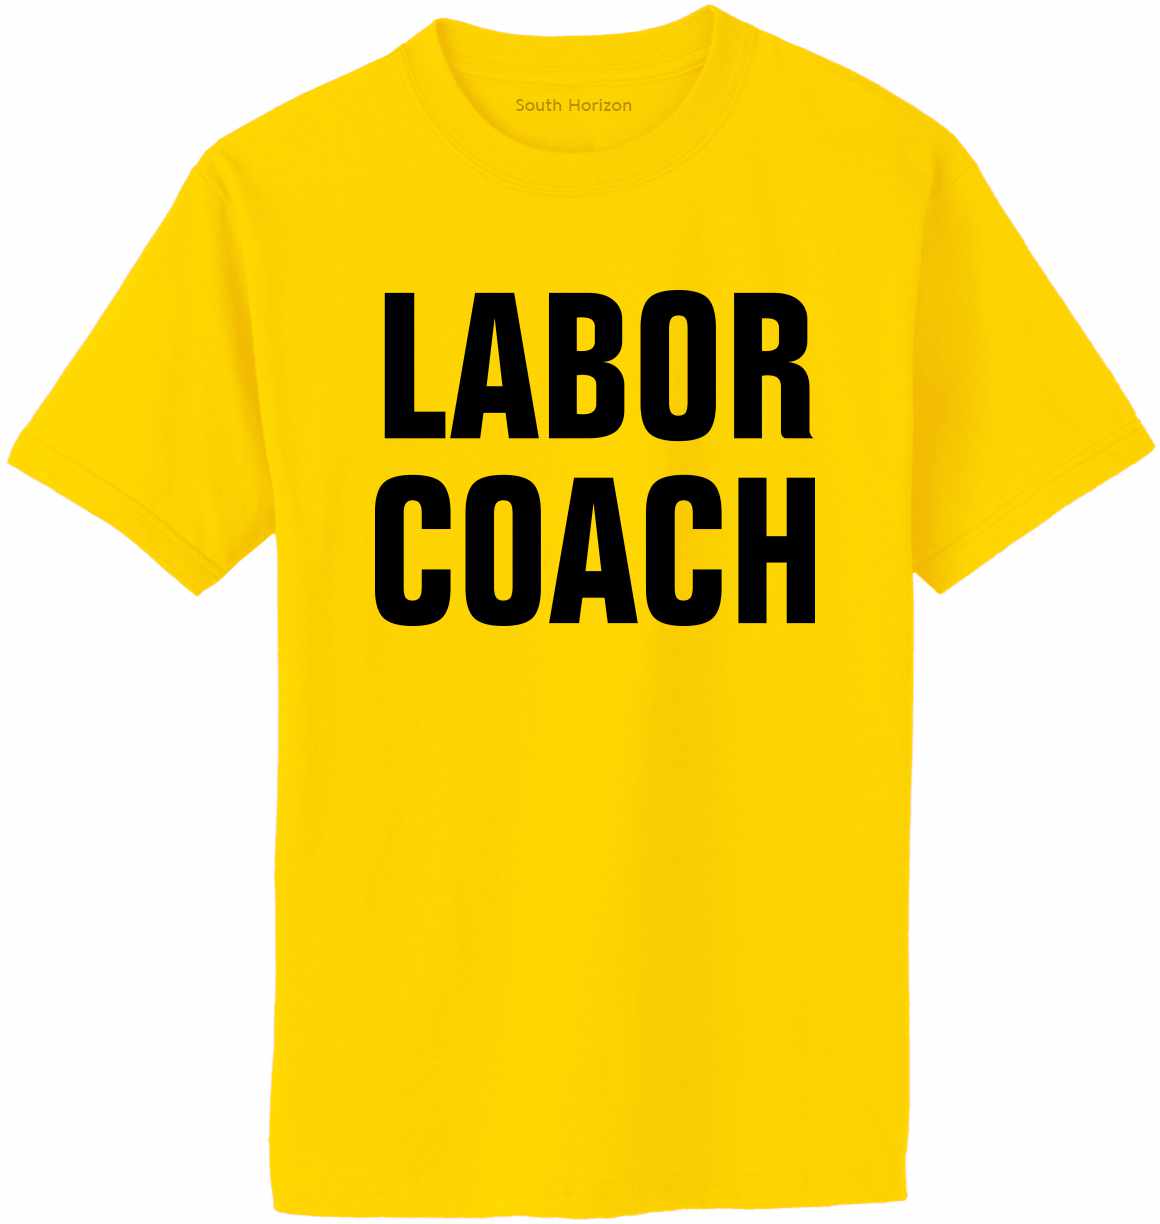 Labor Coach on Adult T-Shirt